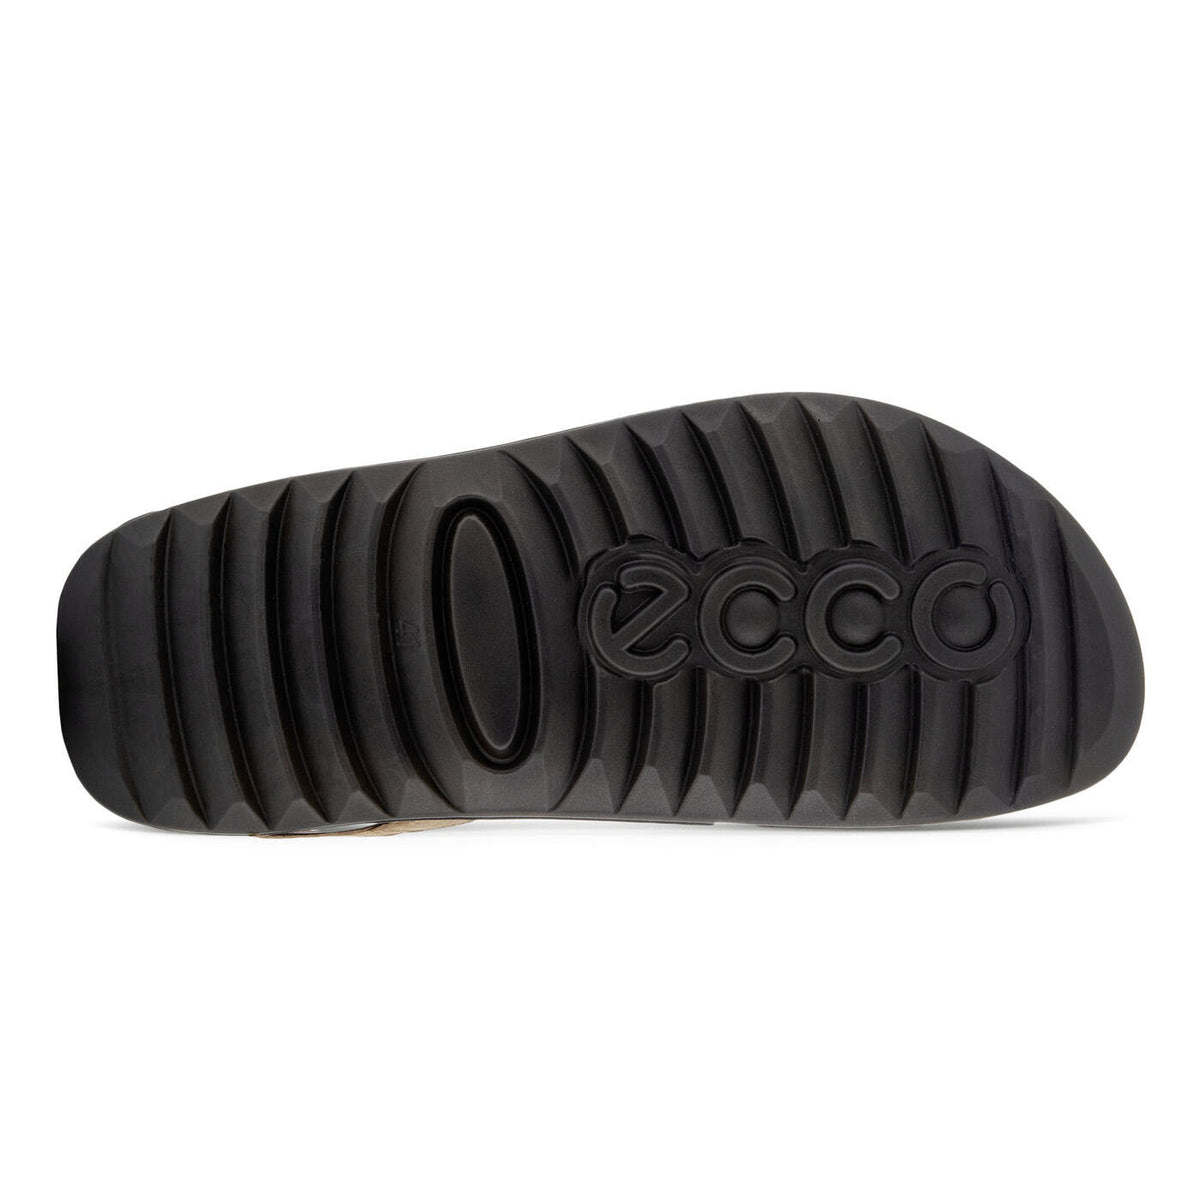 Black rubber ECCO sole with textured ridges and the Ecco brand logo embossed in the center, featuring a supportive footbed.